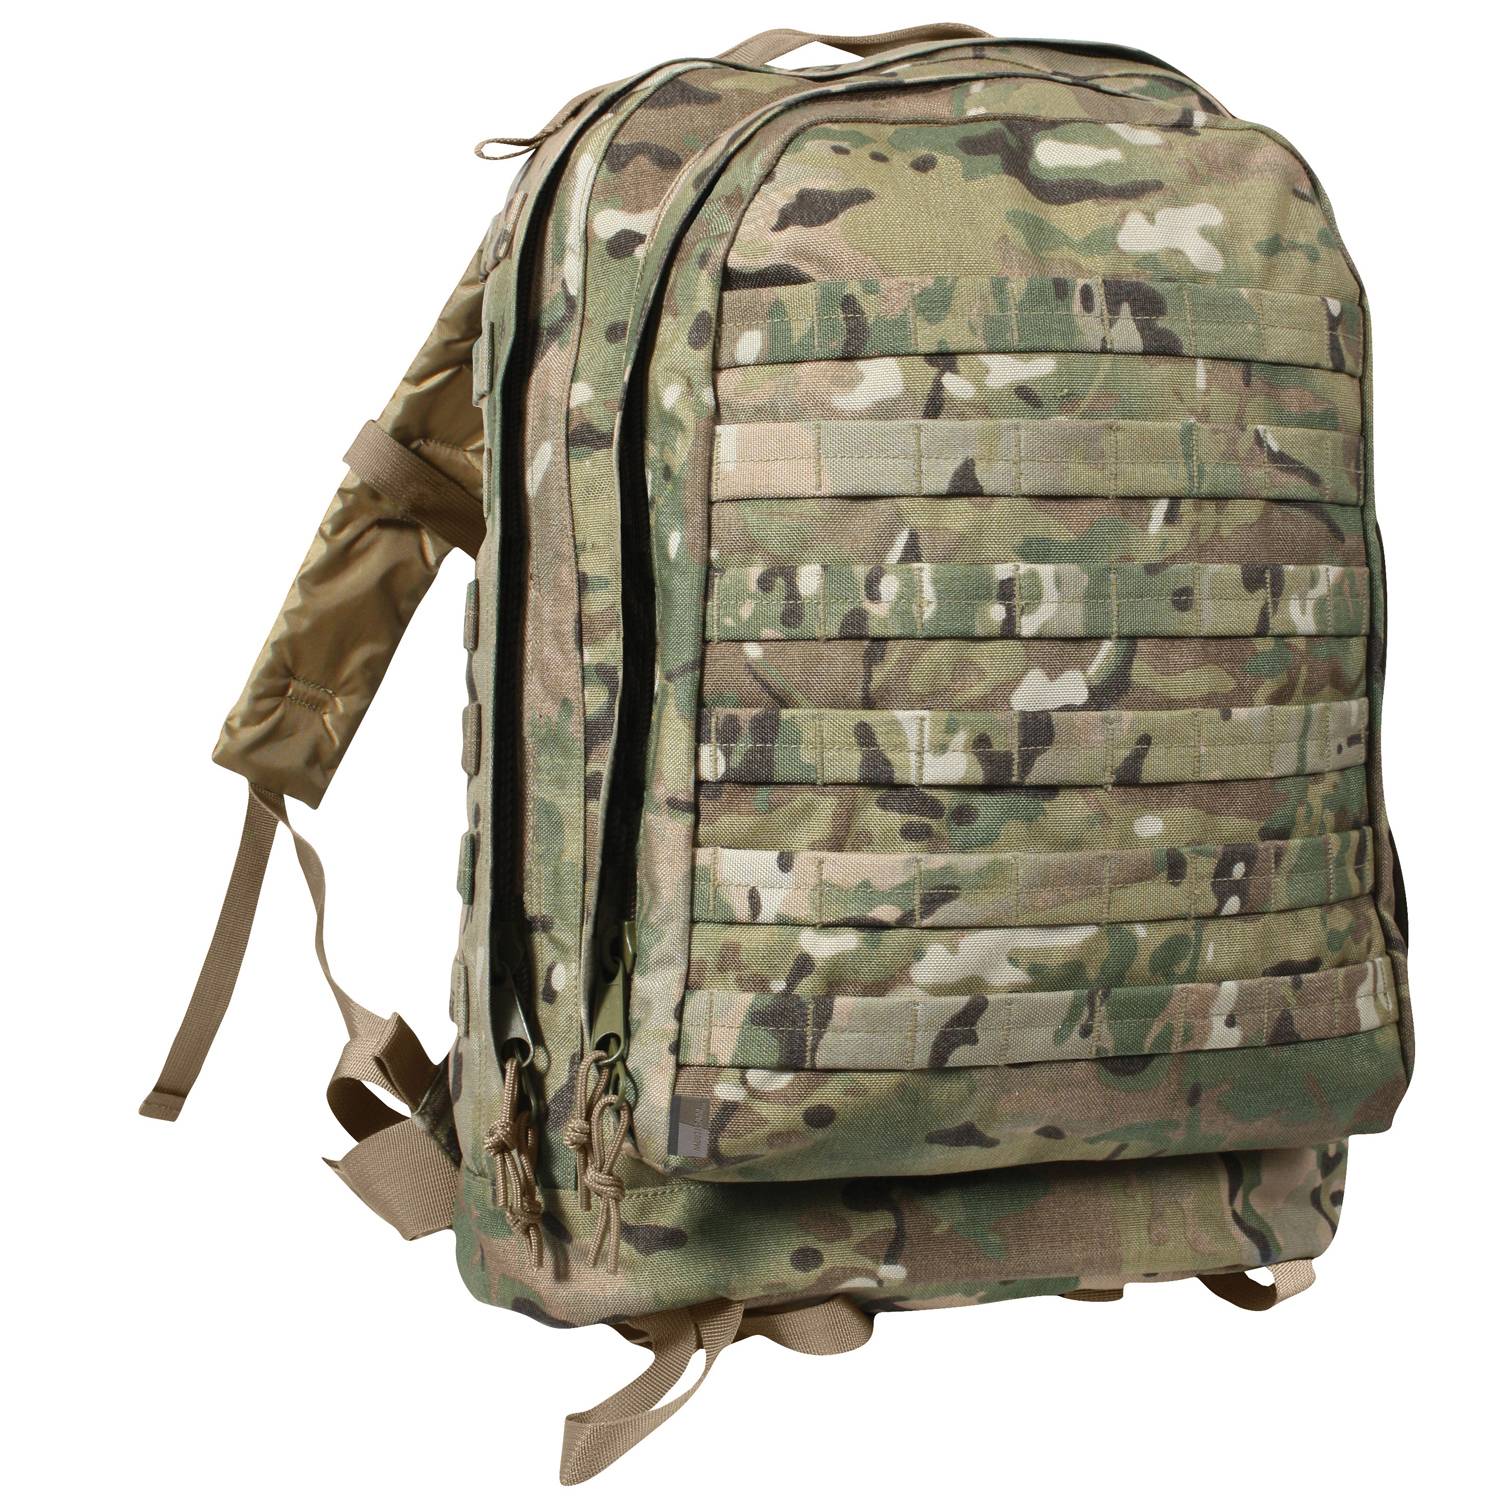 Rothco MOLLE II 3 Day Assault Pack in MultiCam